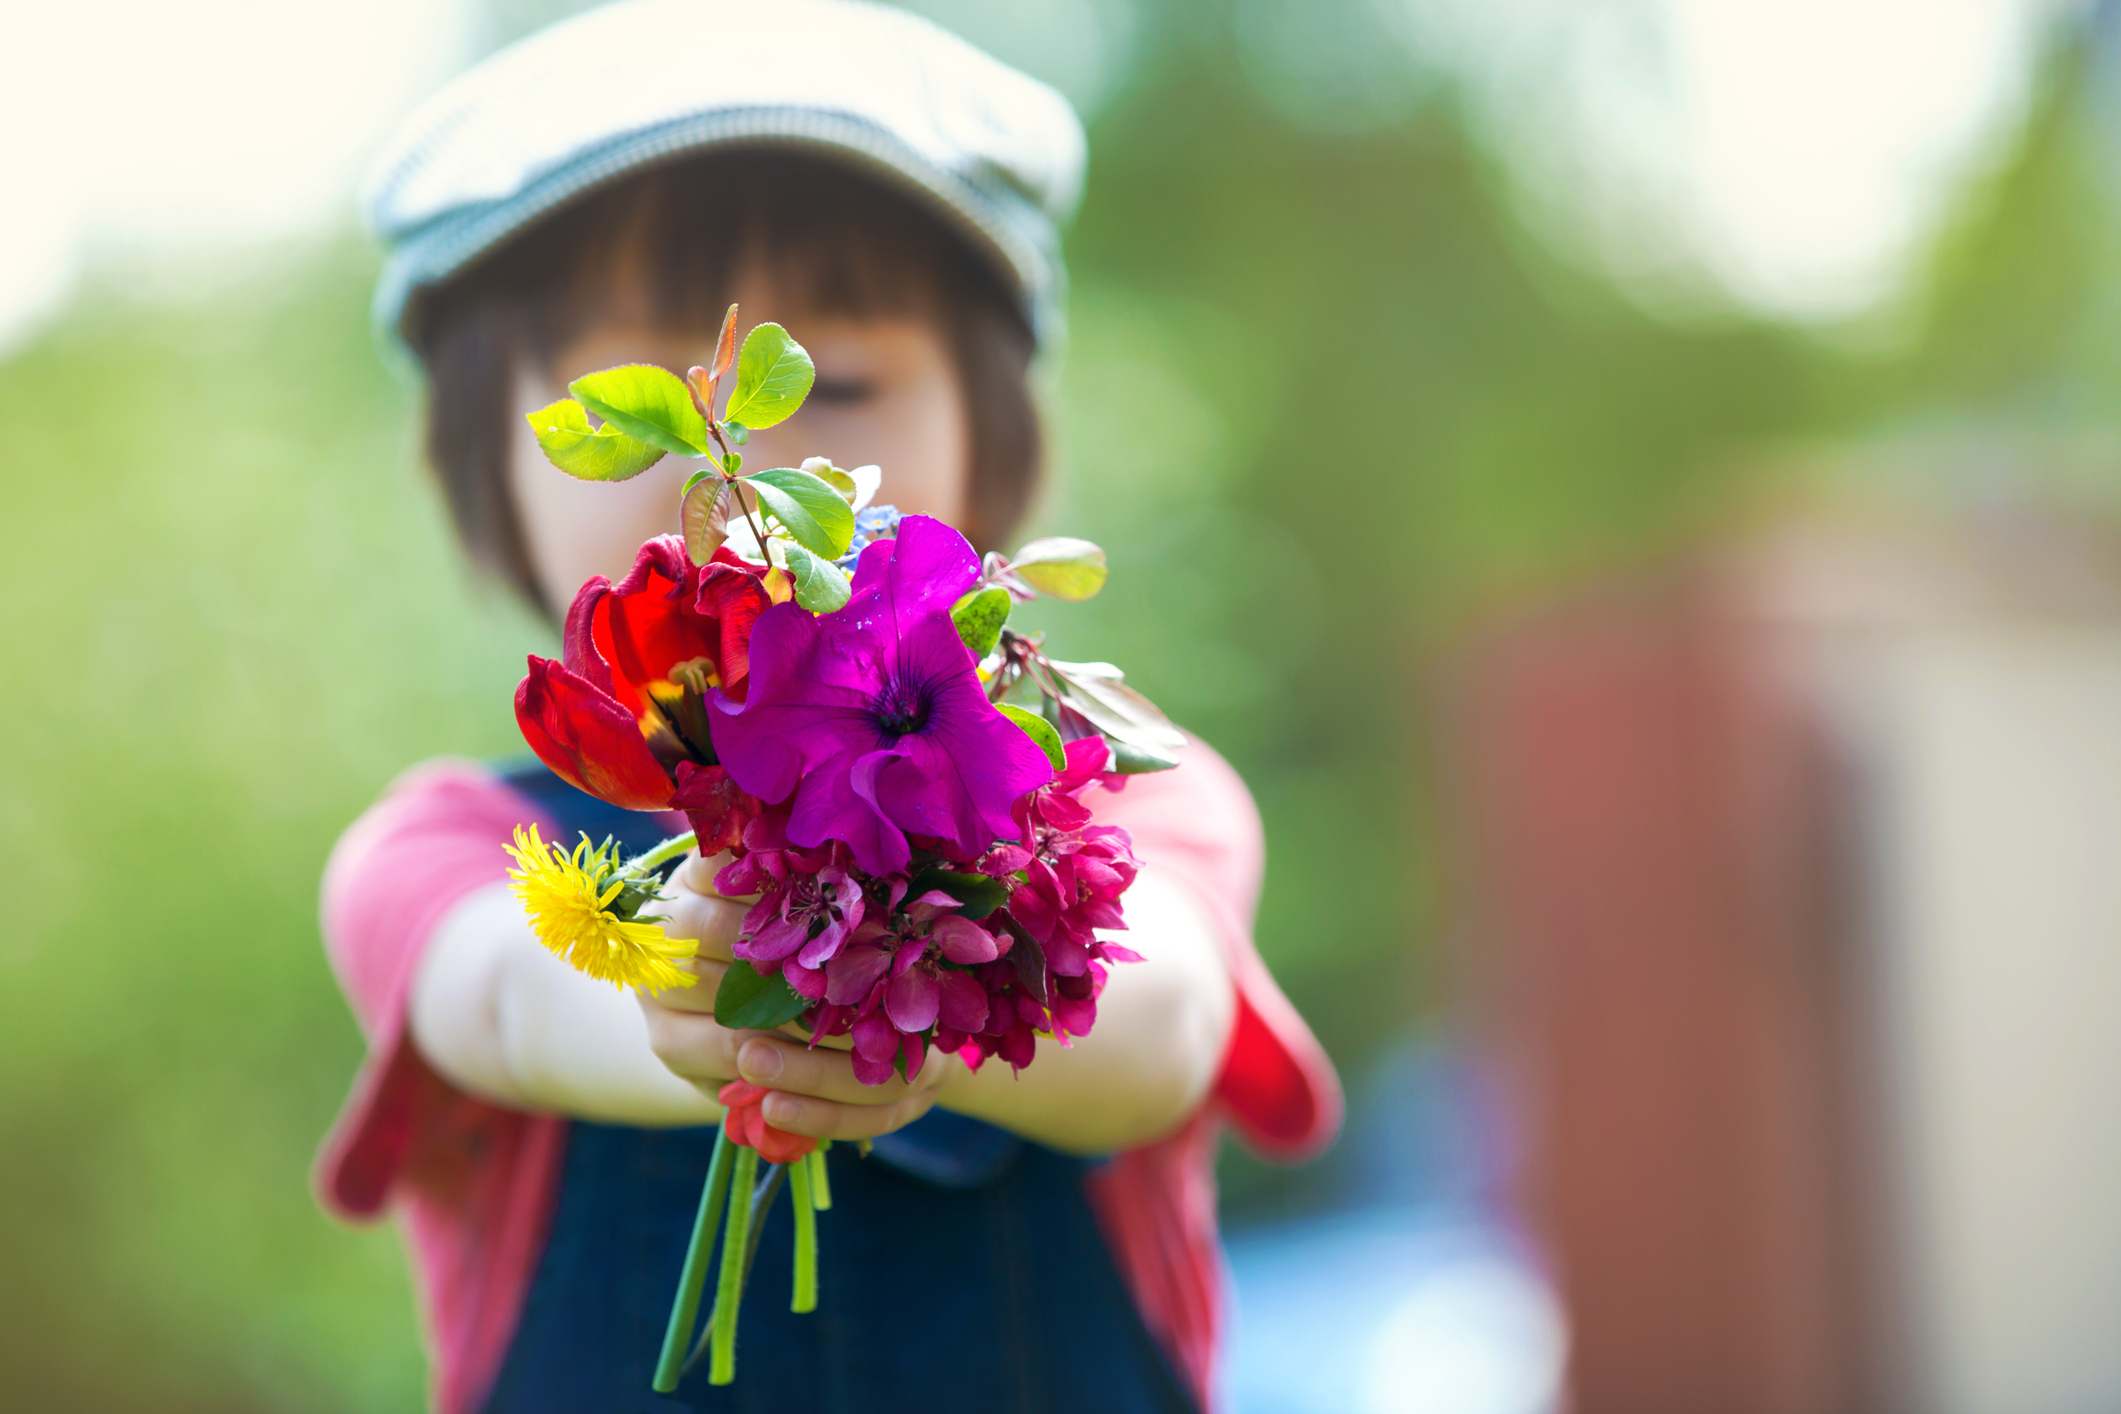 Preschool child, holding bouquet of wild flowers, gathered for mom. Mothers day concept